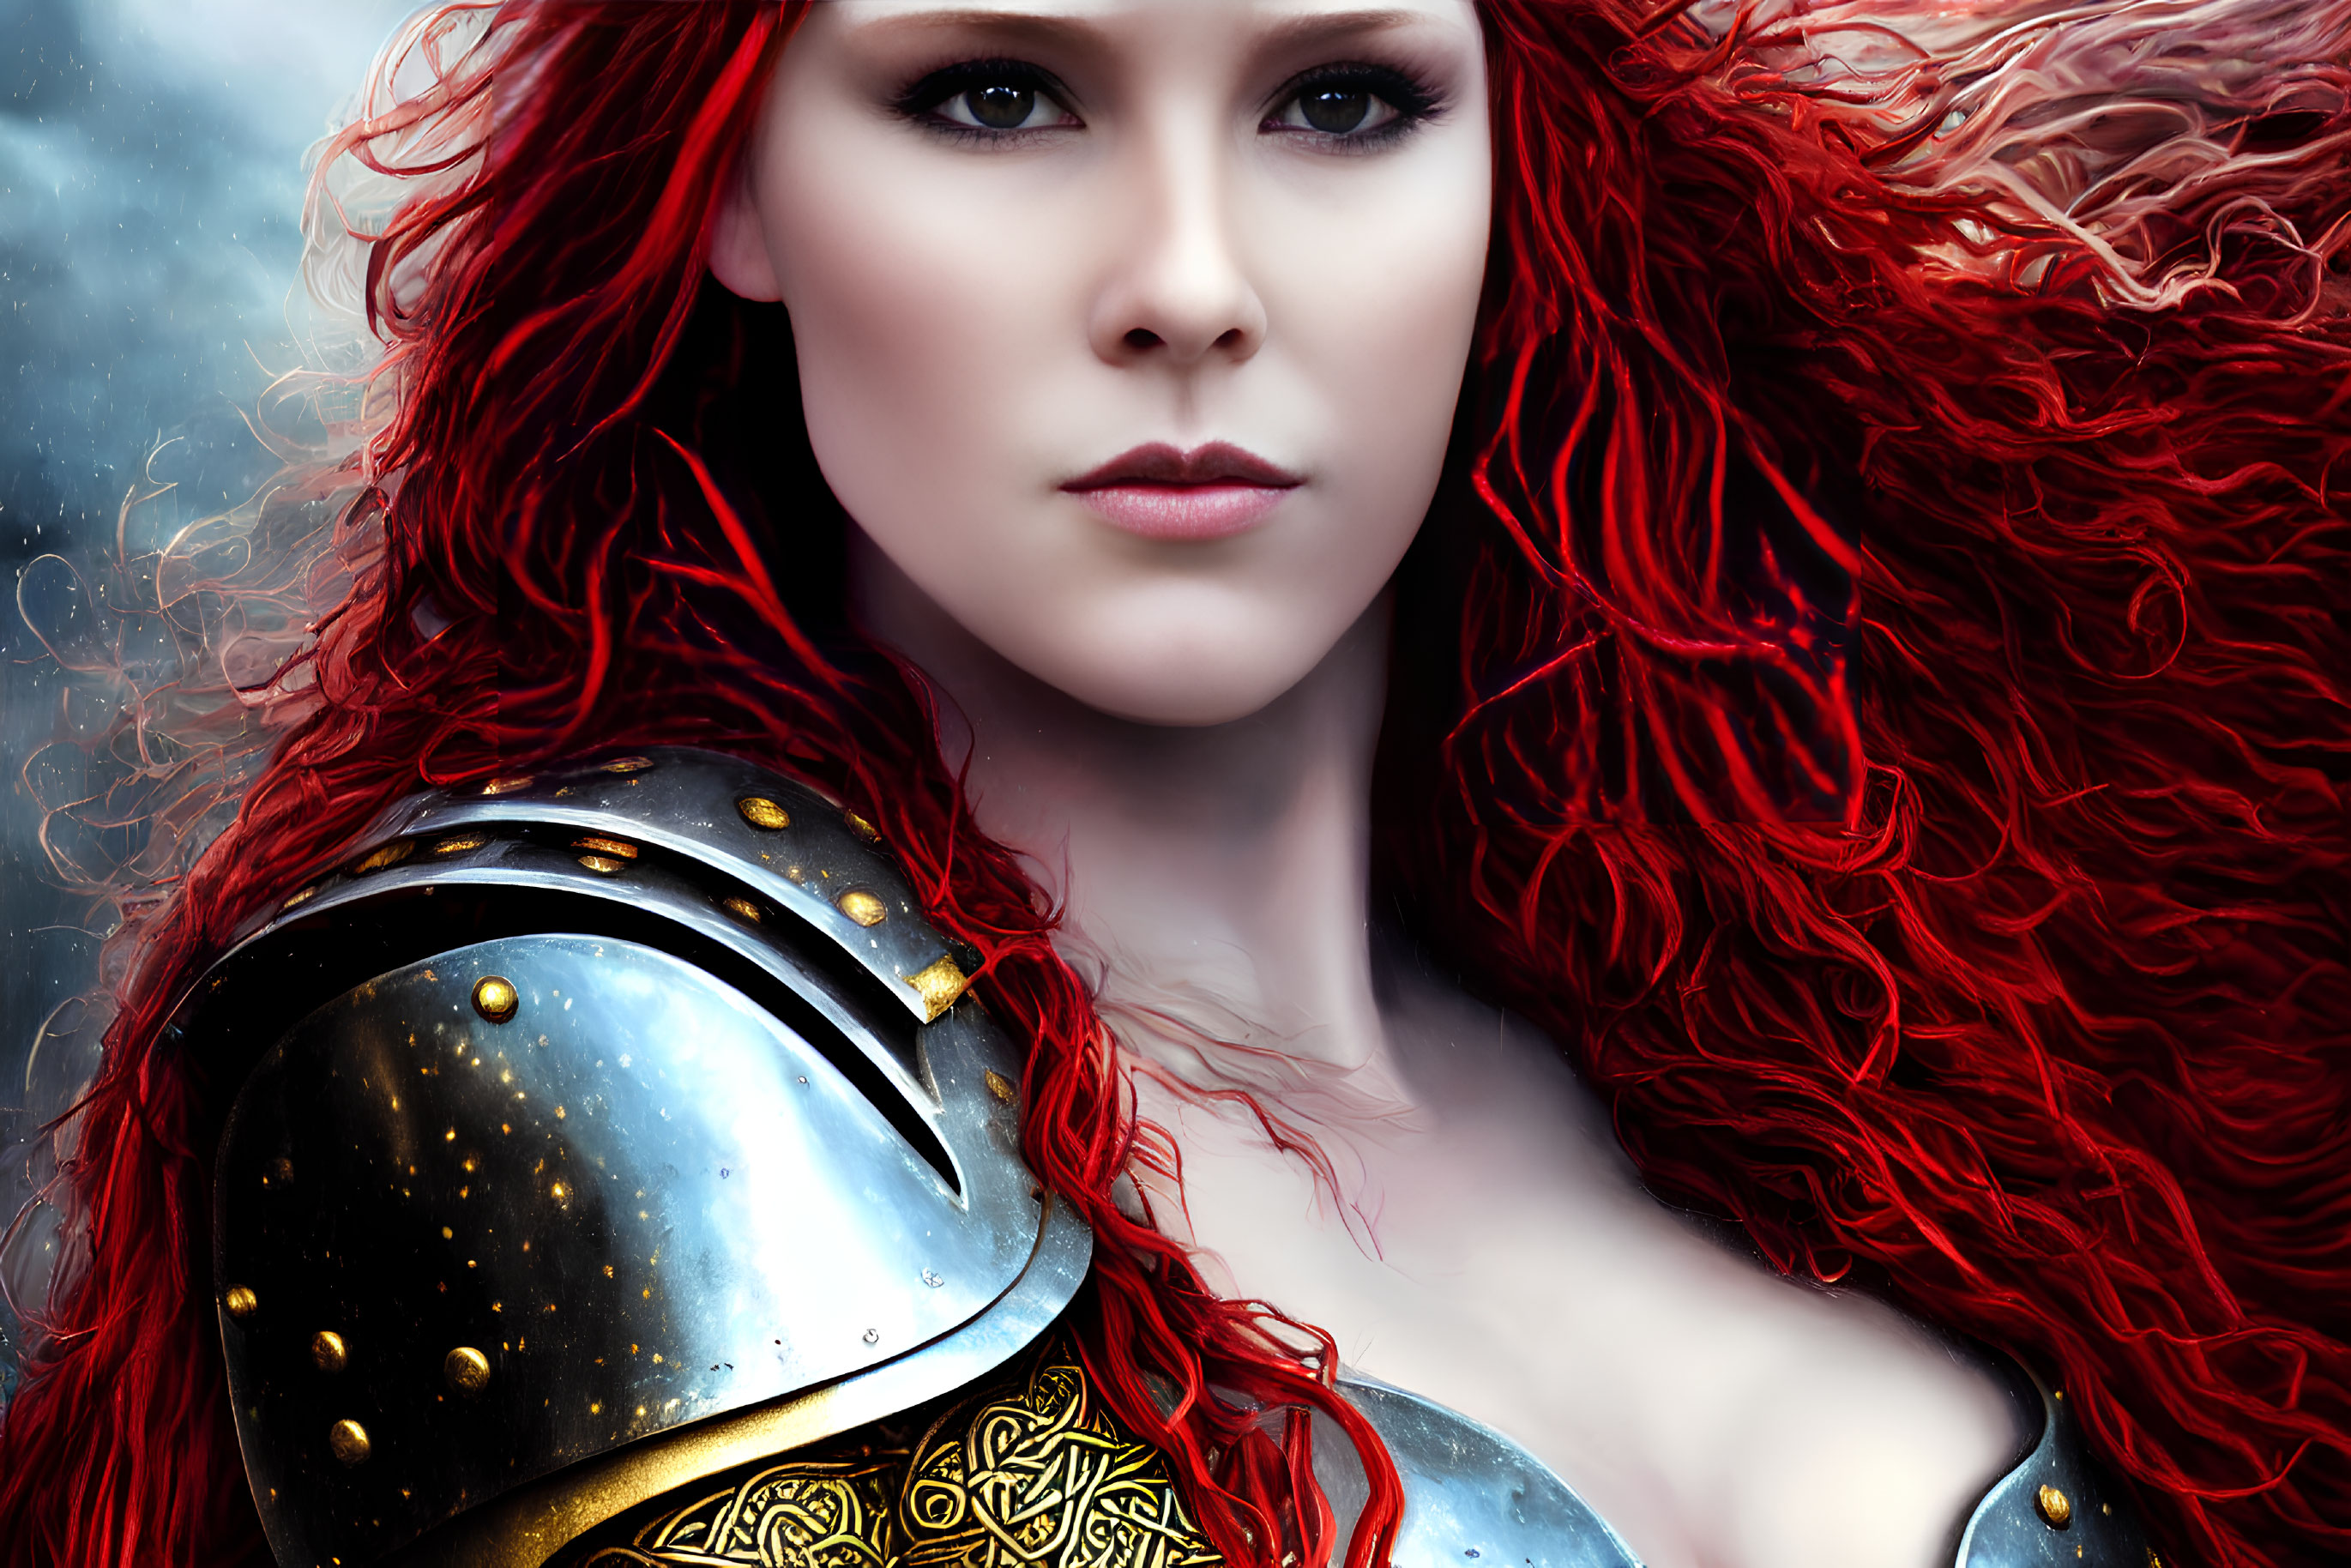 Digital artwork: Woman with red hair in ornate armor on misty background